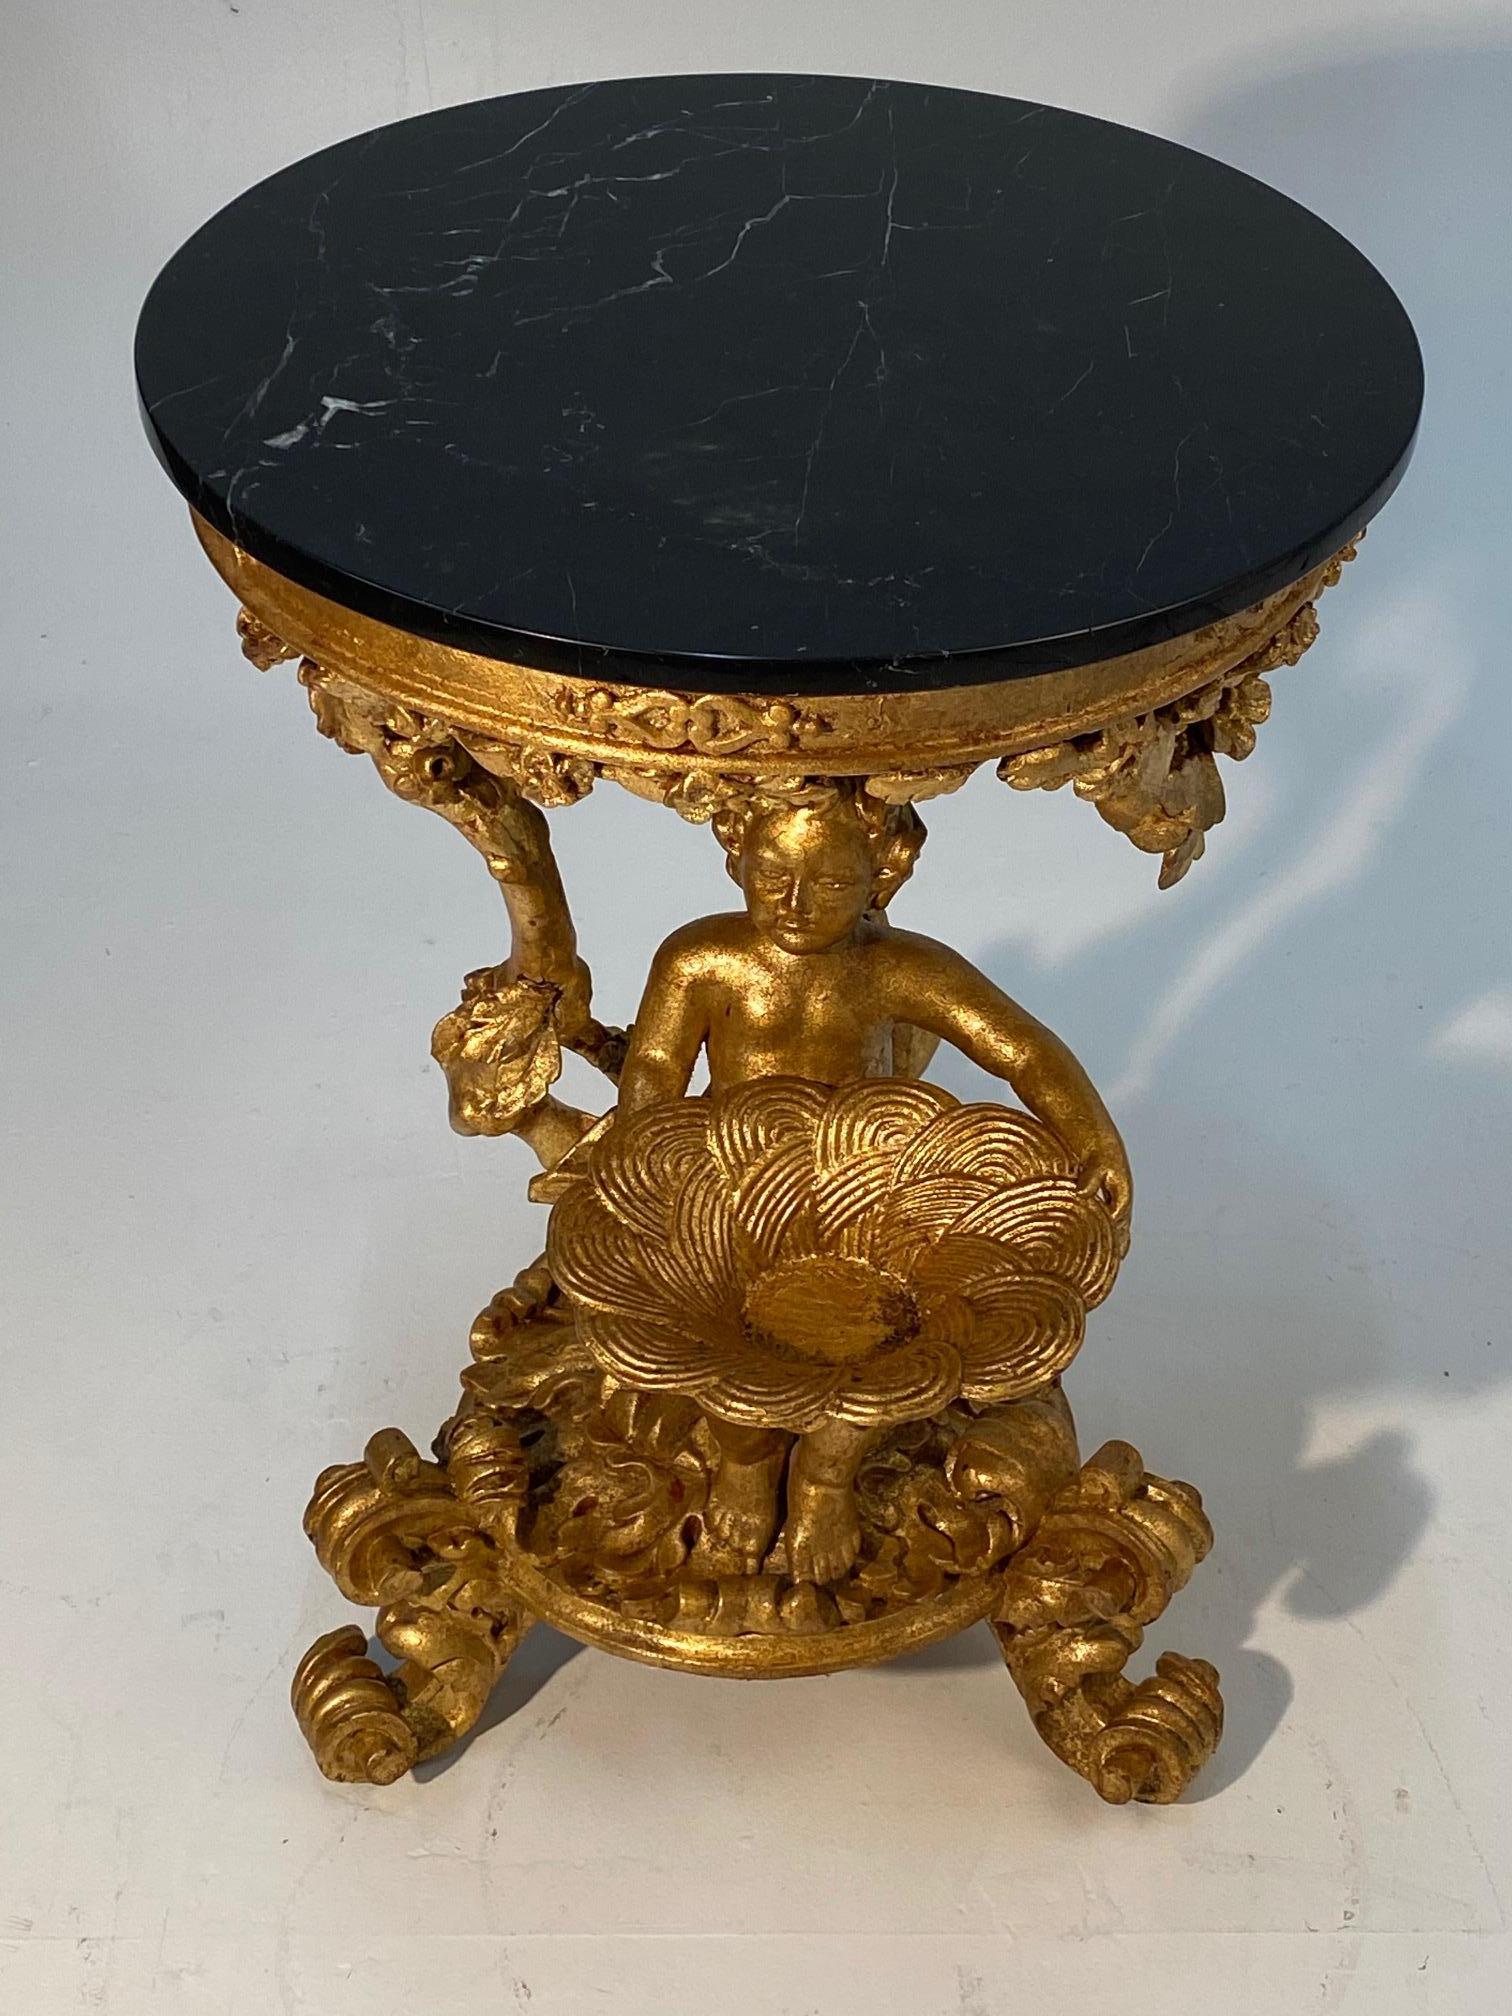 A show stopper ornate Rococo Italian center table having meticulously detailed gesso and gilded carved wood base with putti and black marble top.